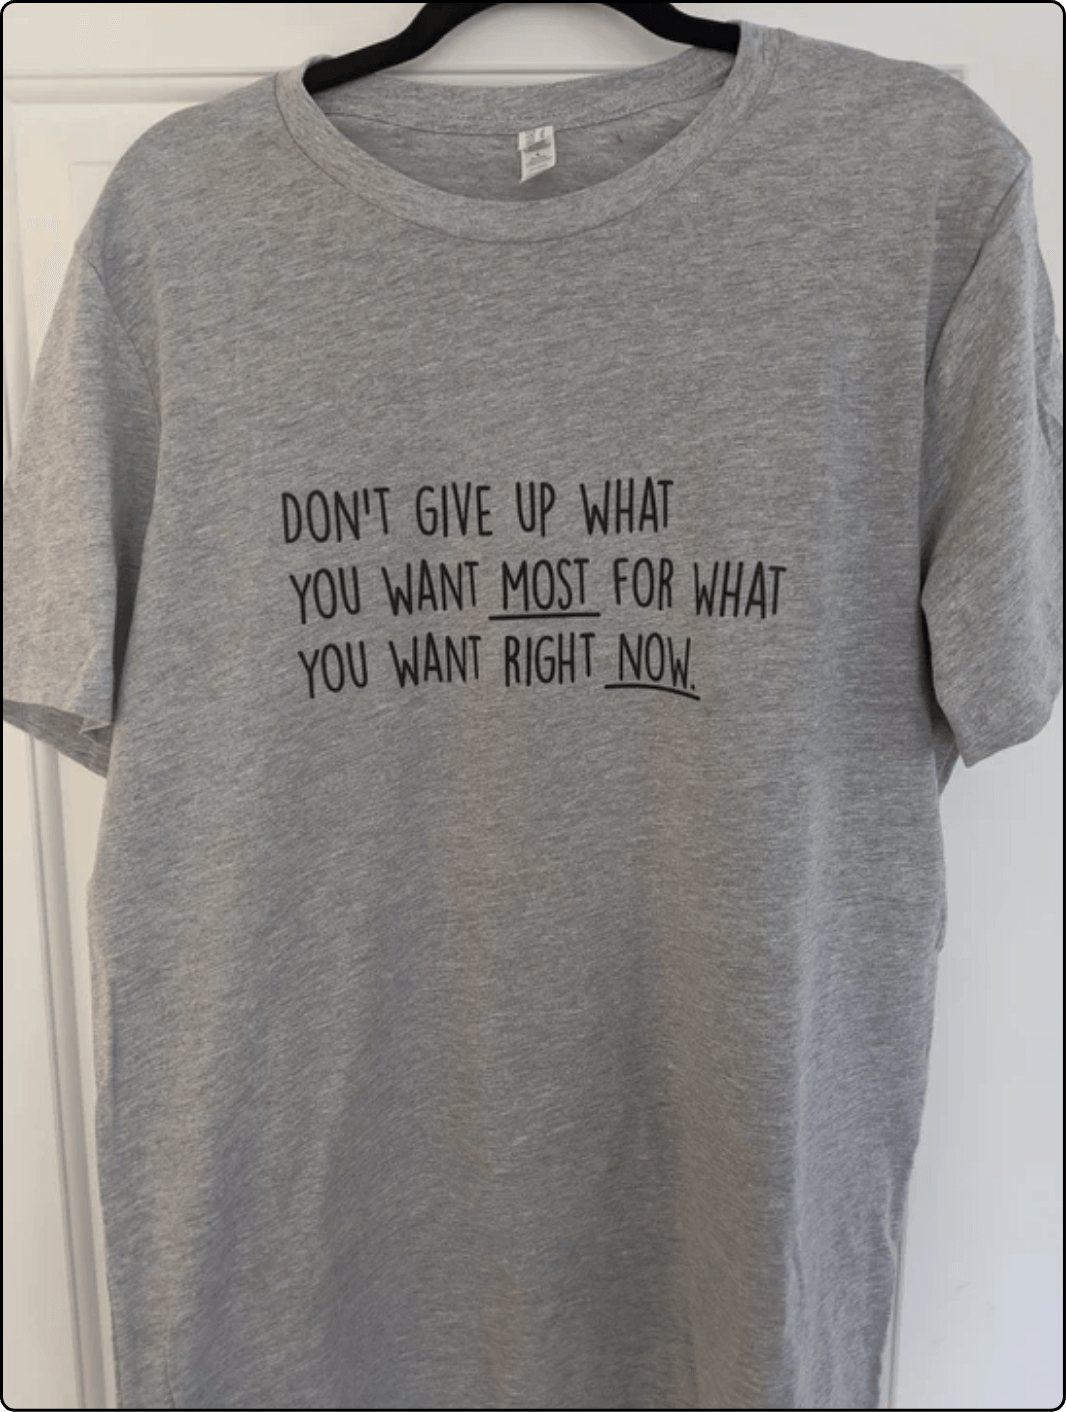 “Don’t give up” t-shirt